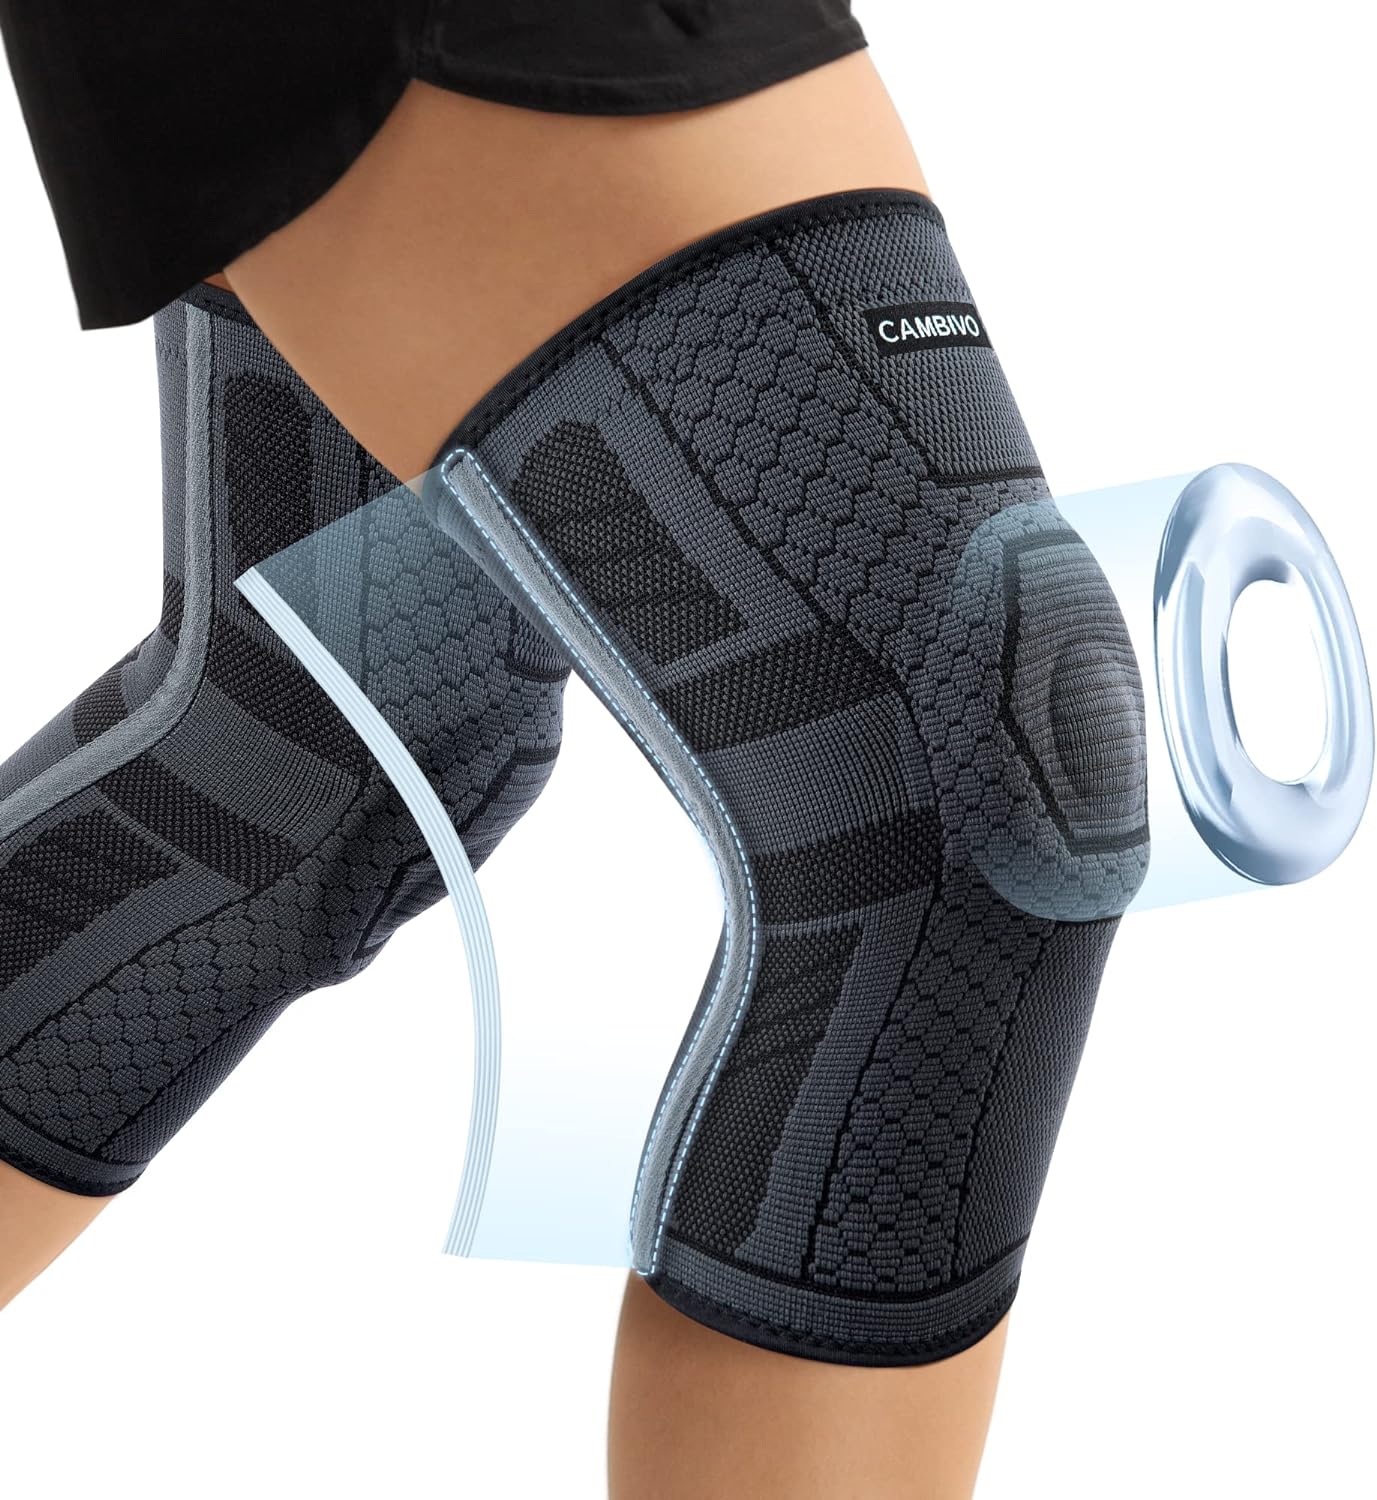 Professional Compression Knee Brace Support Protector For